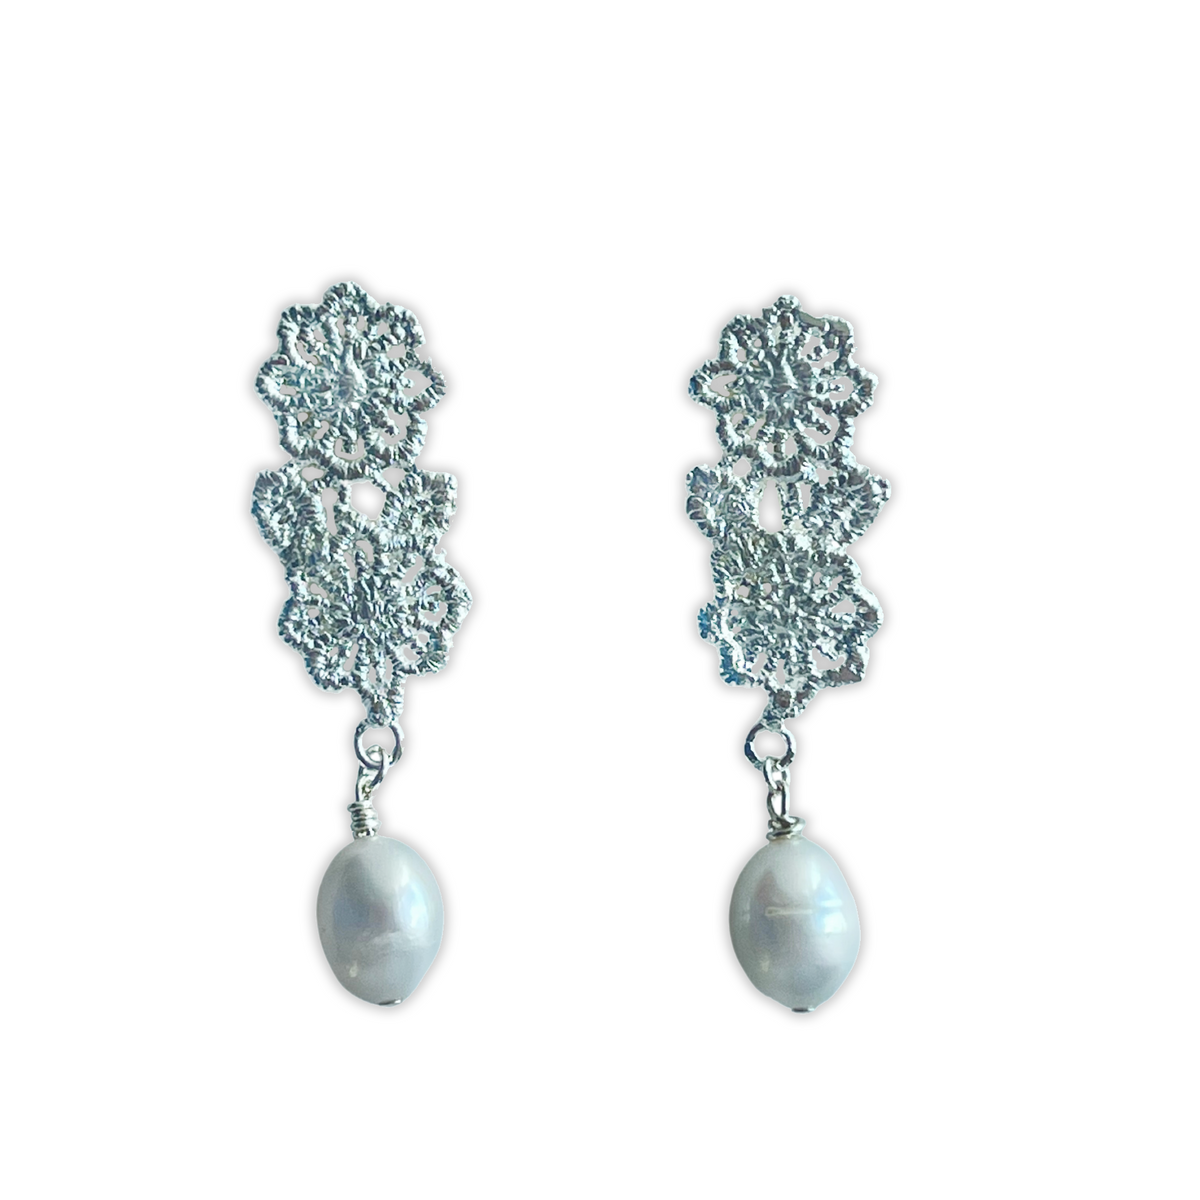 Pearl and Lace Jewelry - Monika Knutsson